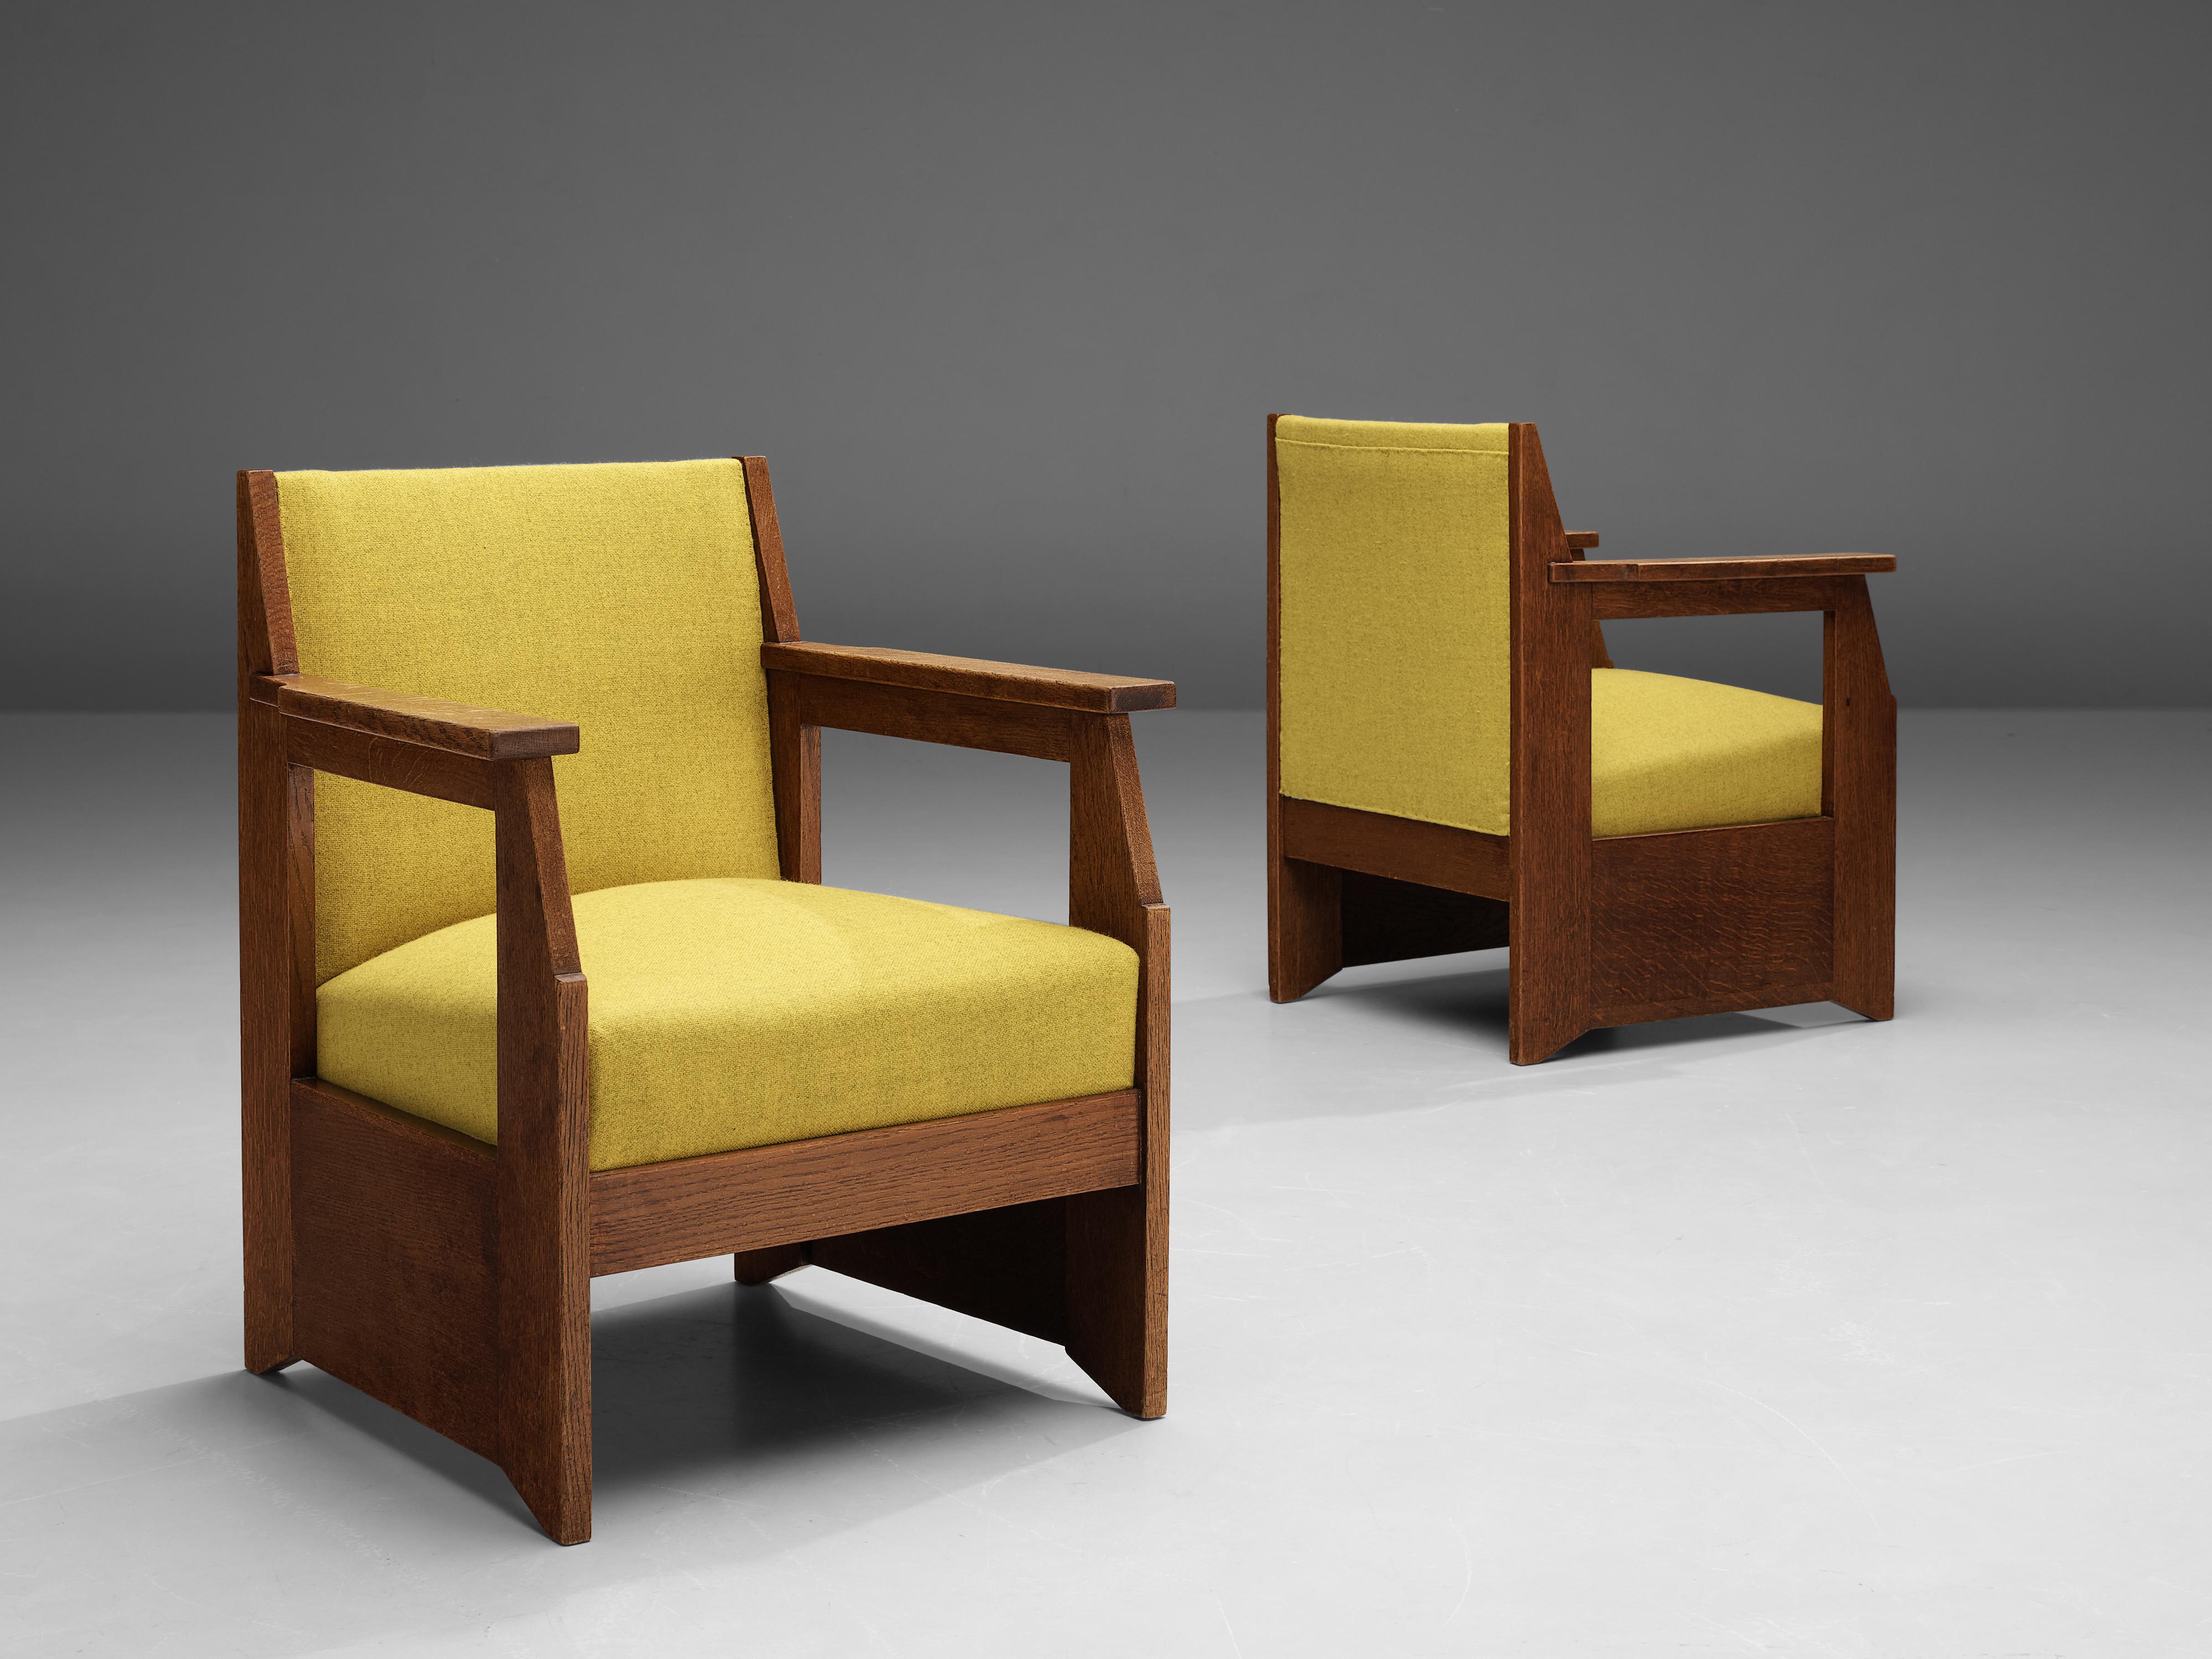 Hendrik Wouda for H. Pander & Zn, pair of armchairs, oak, yellow fabric, The Netherlands, 1930s

These art deco armchairs were designed by the architect Hendrik Wouda in the 1930s. This rare set of armchairs has a very sleek shape. As the sides of